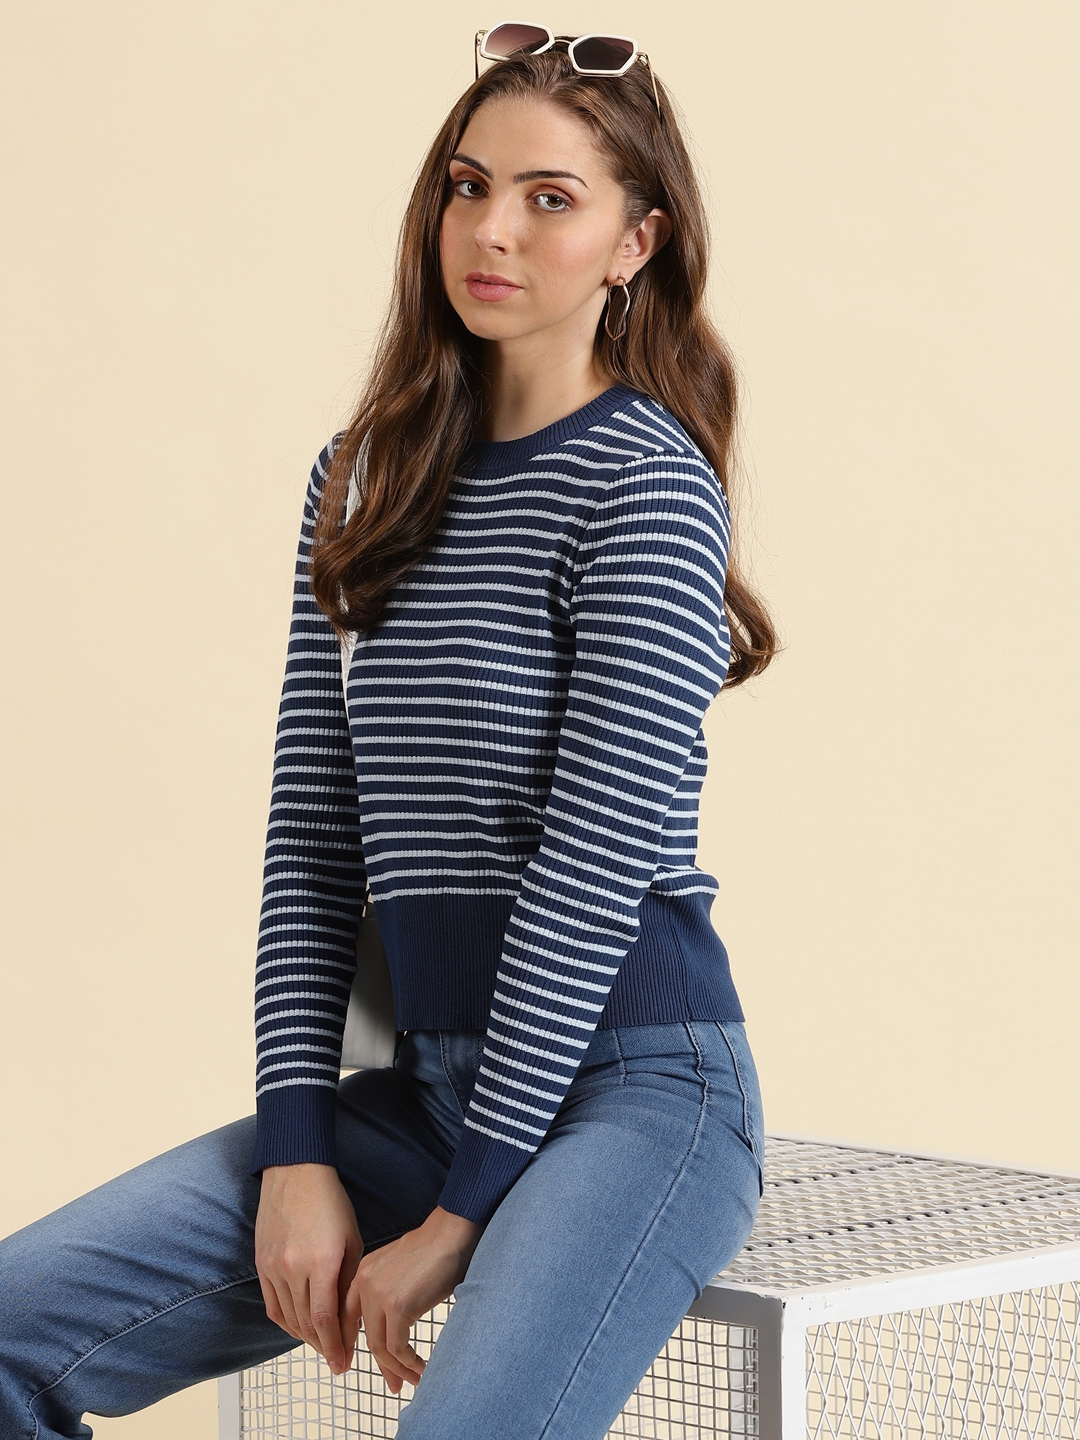 Showoff | SHOWOFF Women's High Neck Striped NavyBlue Fitted Regular Top